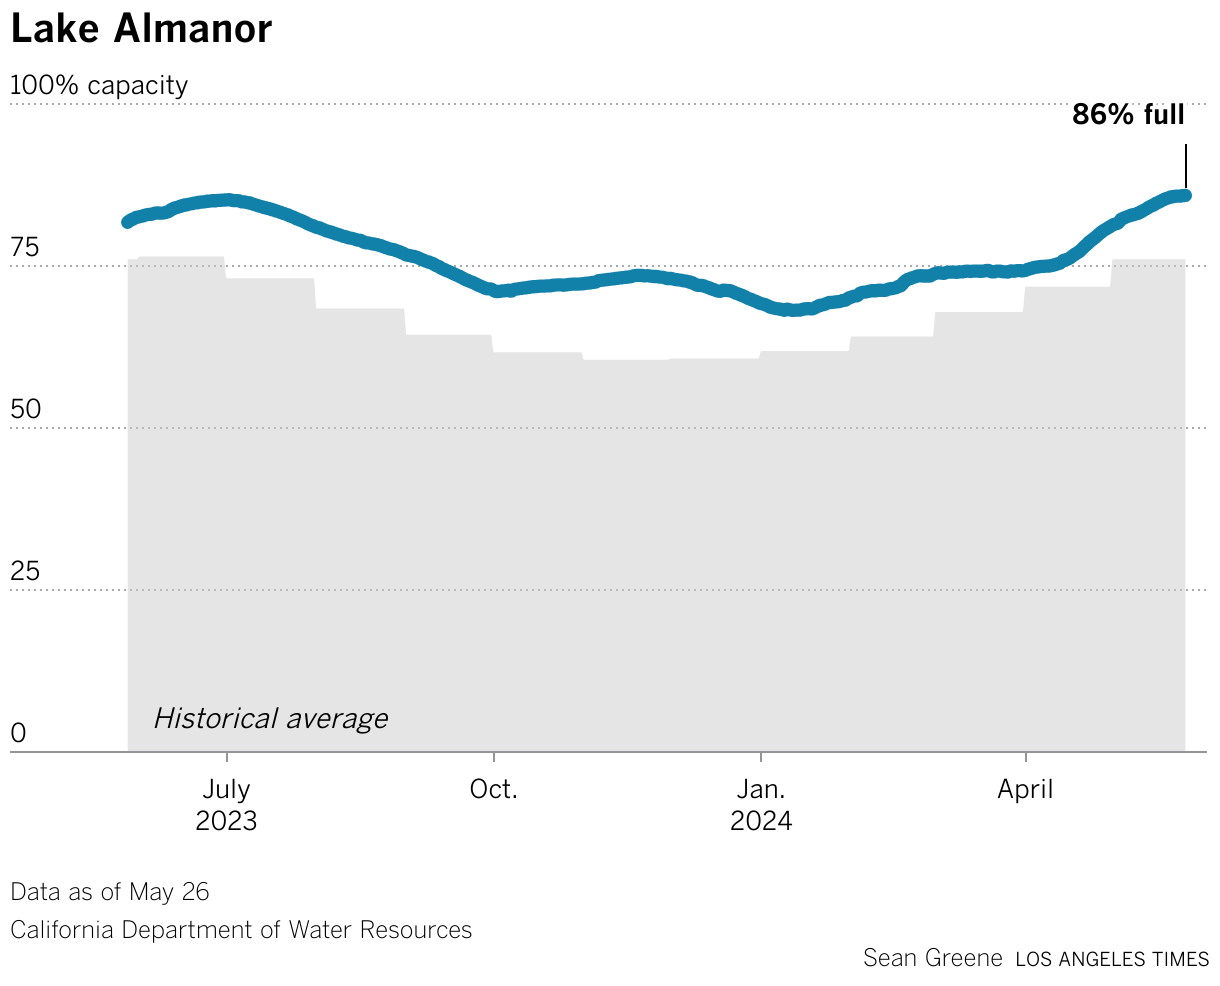 Lake Almanor's storage capacity is 111% of average for this month.